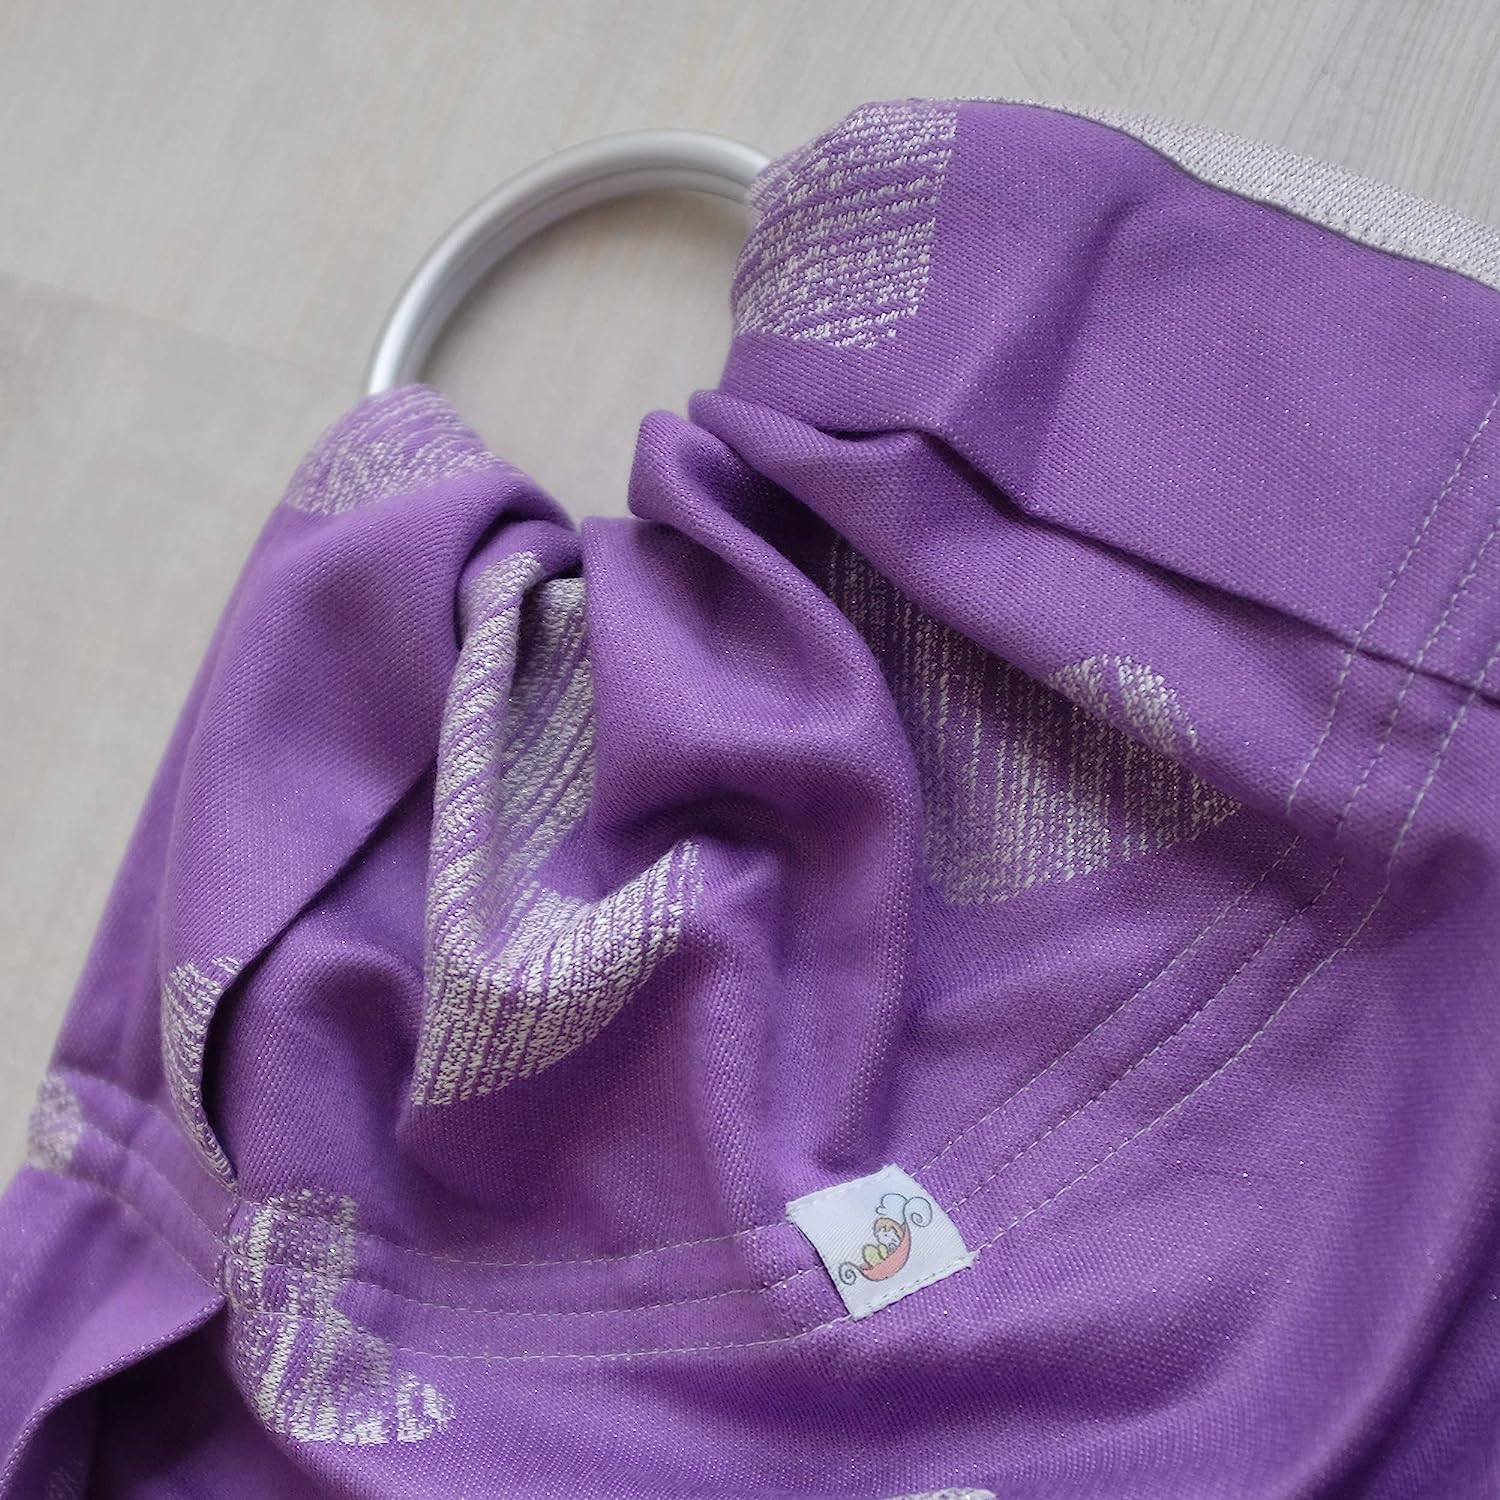 Schmusewolke Ring Sling Baby Sling Hybrid Jacquard Heartline Violet Shine Organic Cotton 80 x 215 cm Baby Size Toddler Size Baby and Toddler 9-60 Months 6-16 kg Hip Carrier